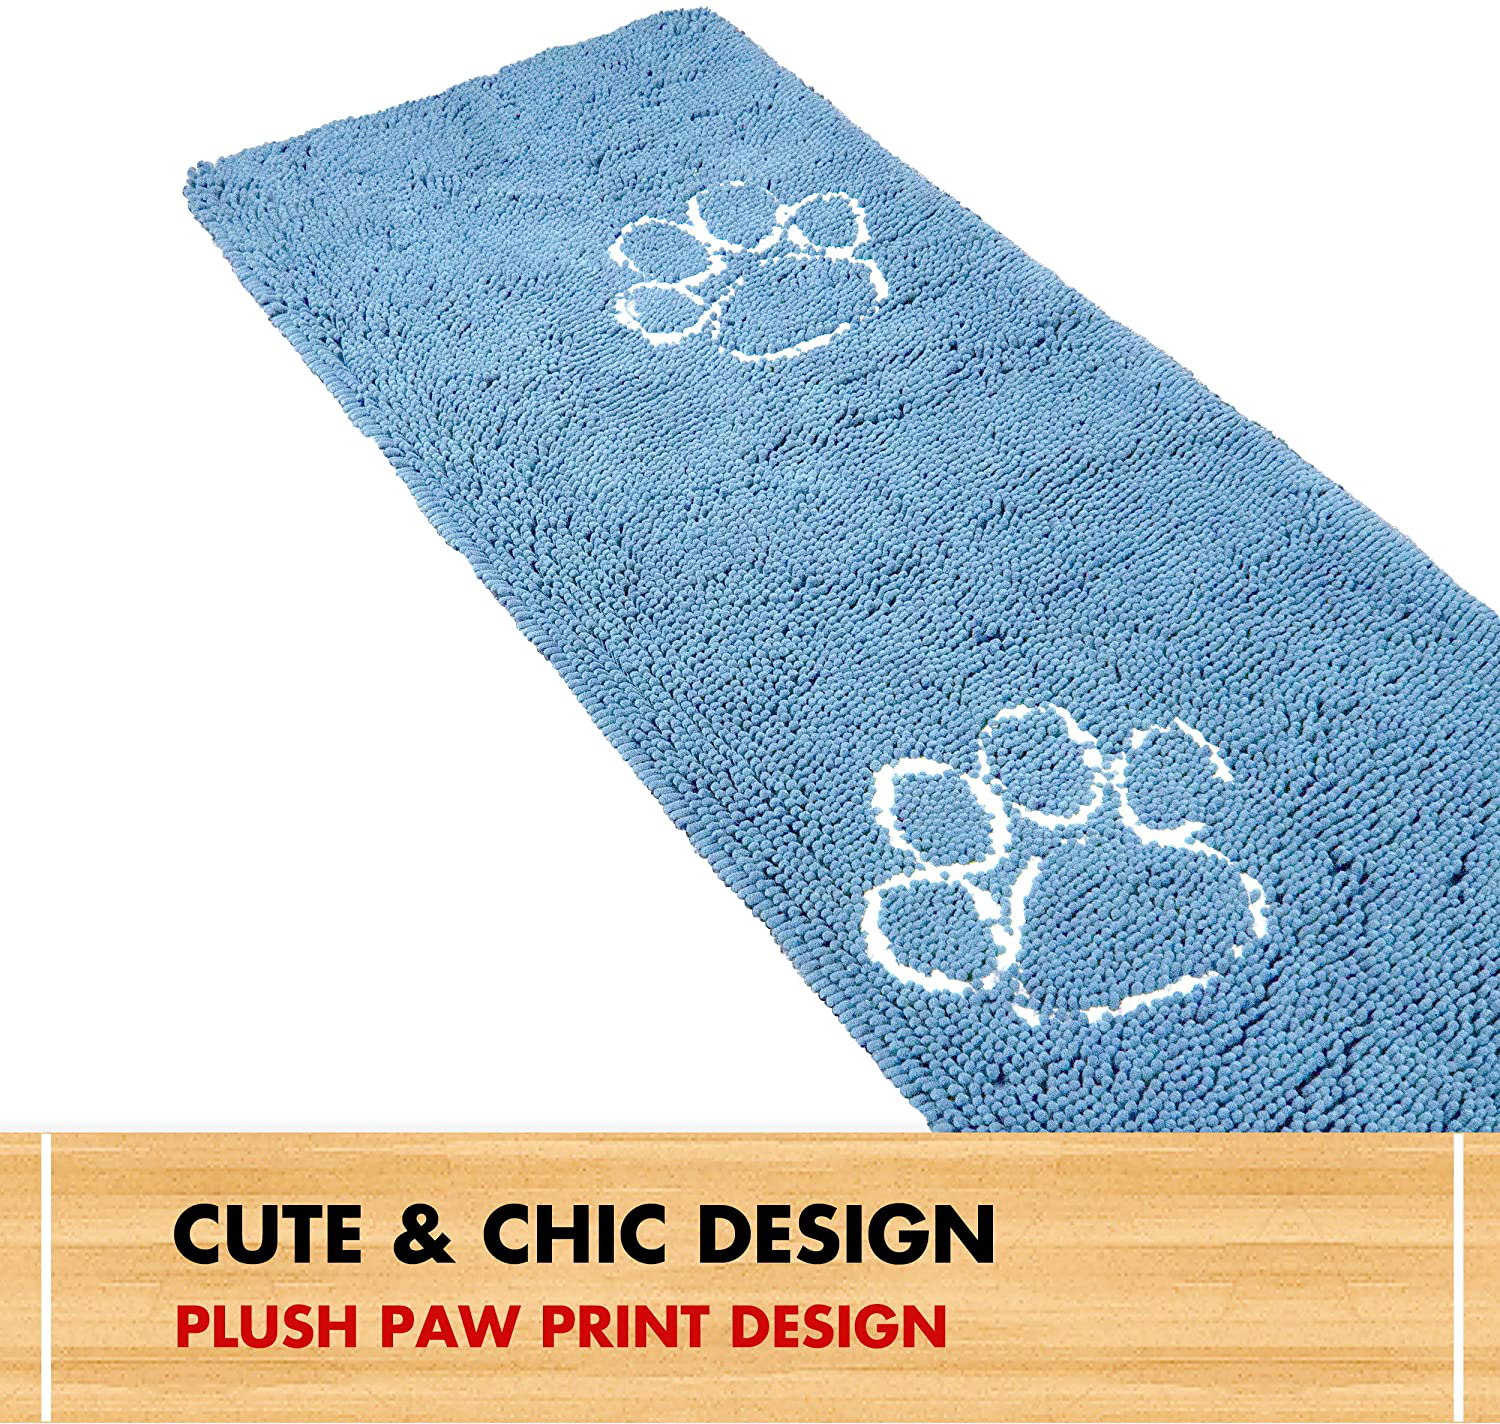 My Doggy Place - Ultra Absorbent Microfiber Dog Door Mat, Durable, Quick Drying, Washable, Prevent Mud Dirt, Keep Your House Clean (Faded Denim W/Paw Print, Hallway Runner) - 8' X 2' Feet